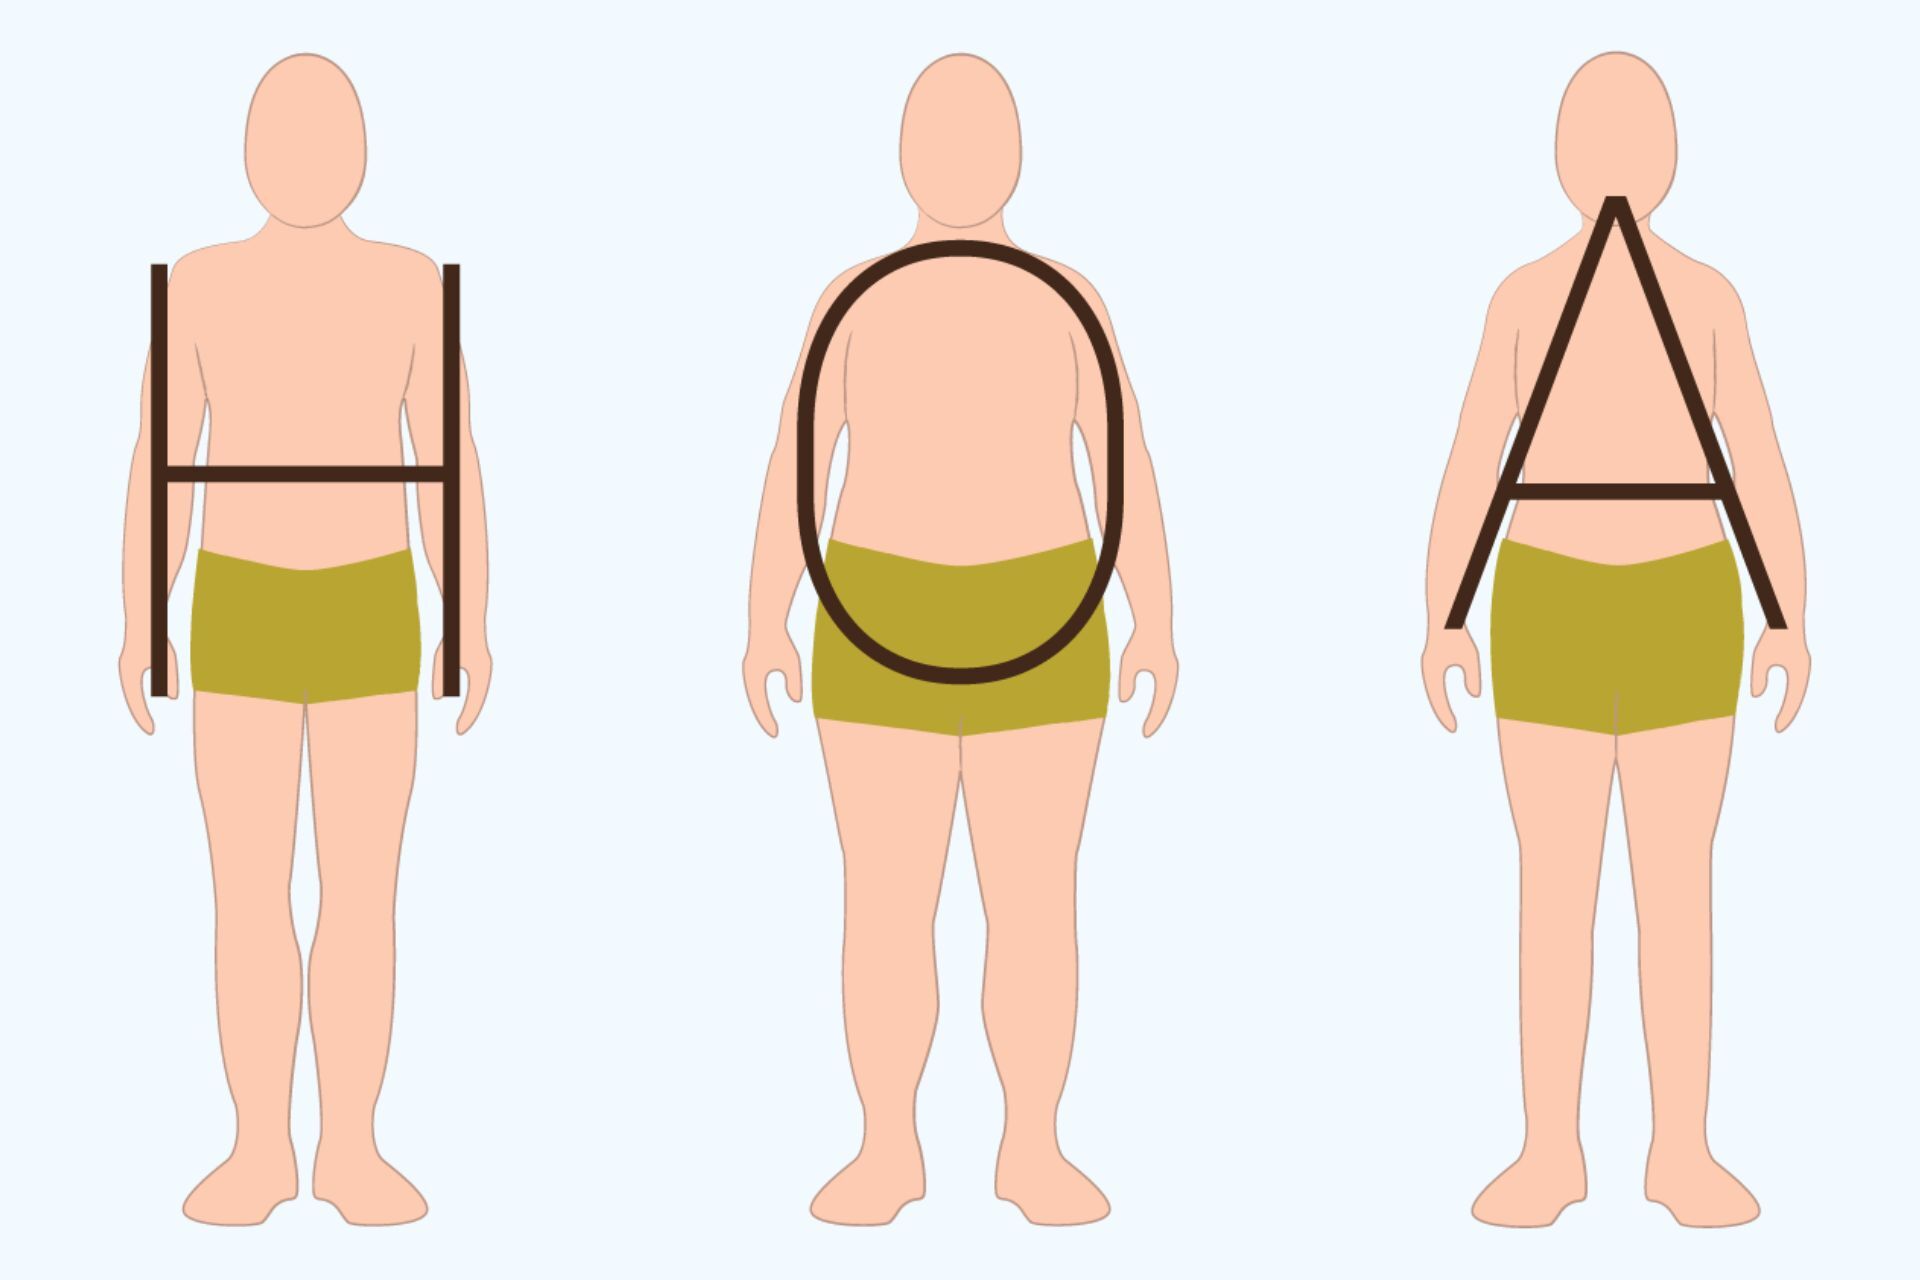 Men's Guide to How to Dress for Your Body Type